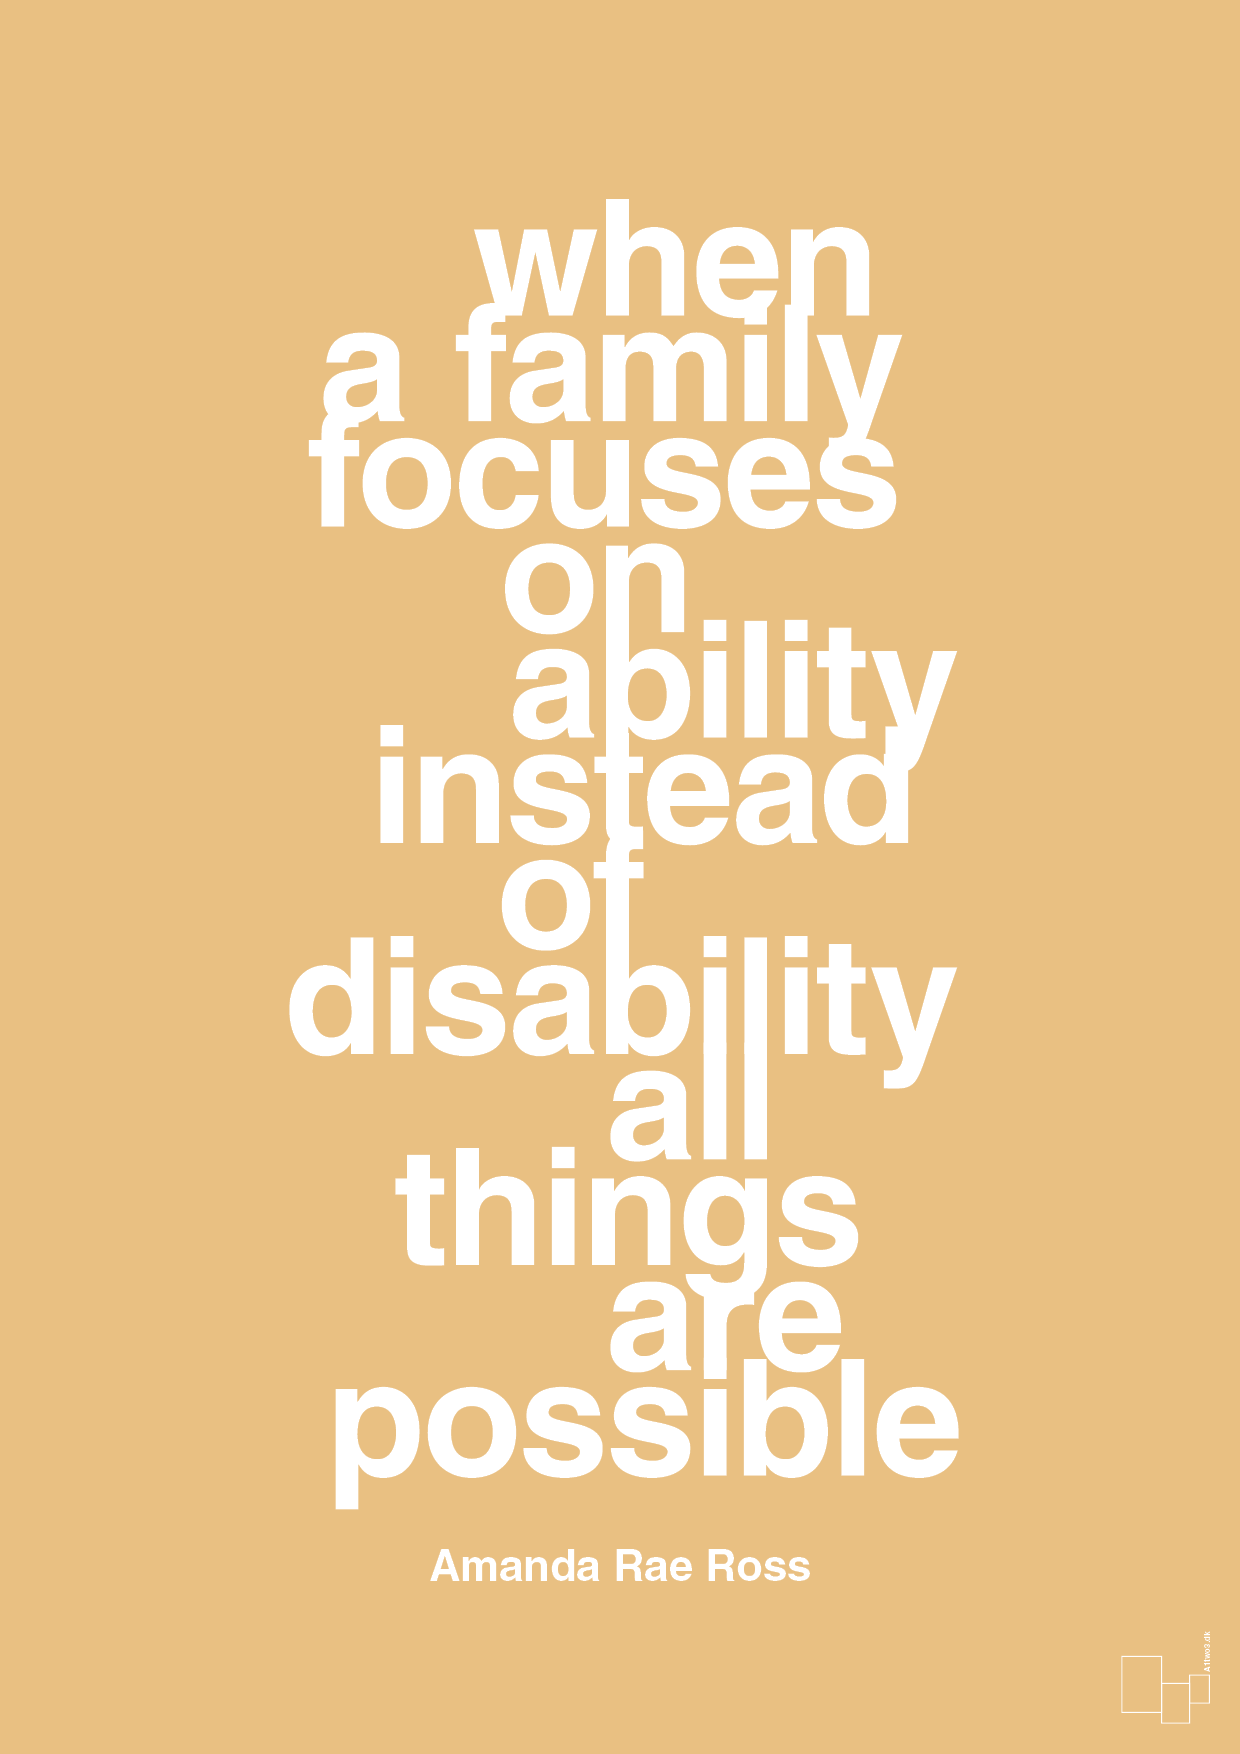 when a family focuses on ability instead of disability all things are possible - Plakat med Samfund i Charismatic